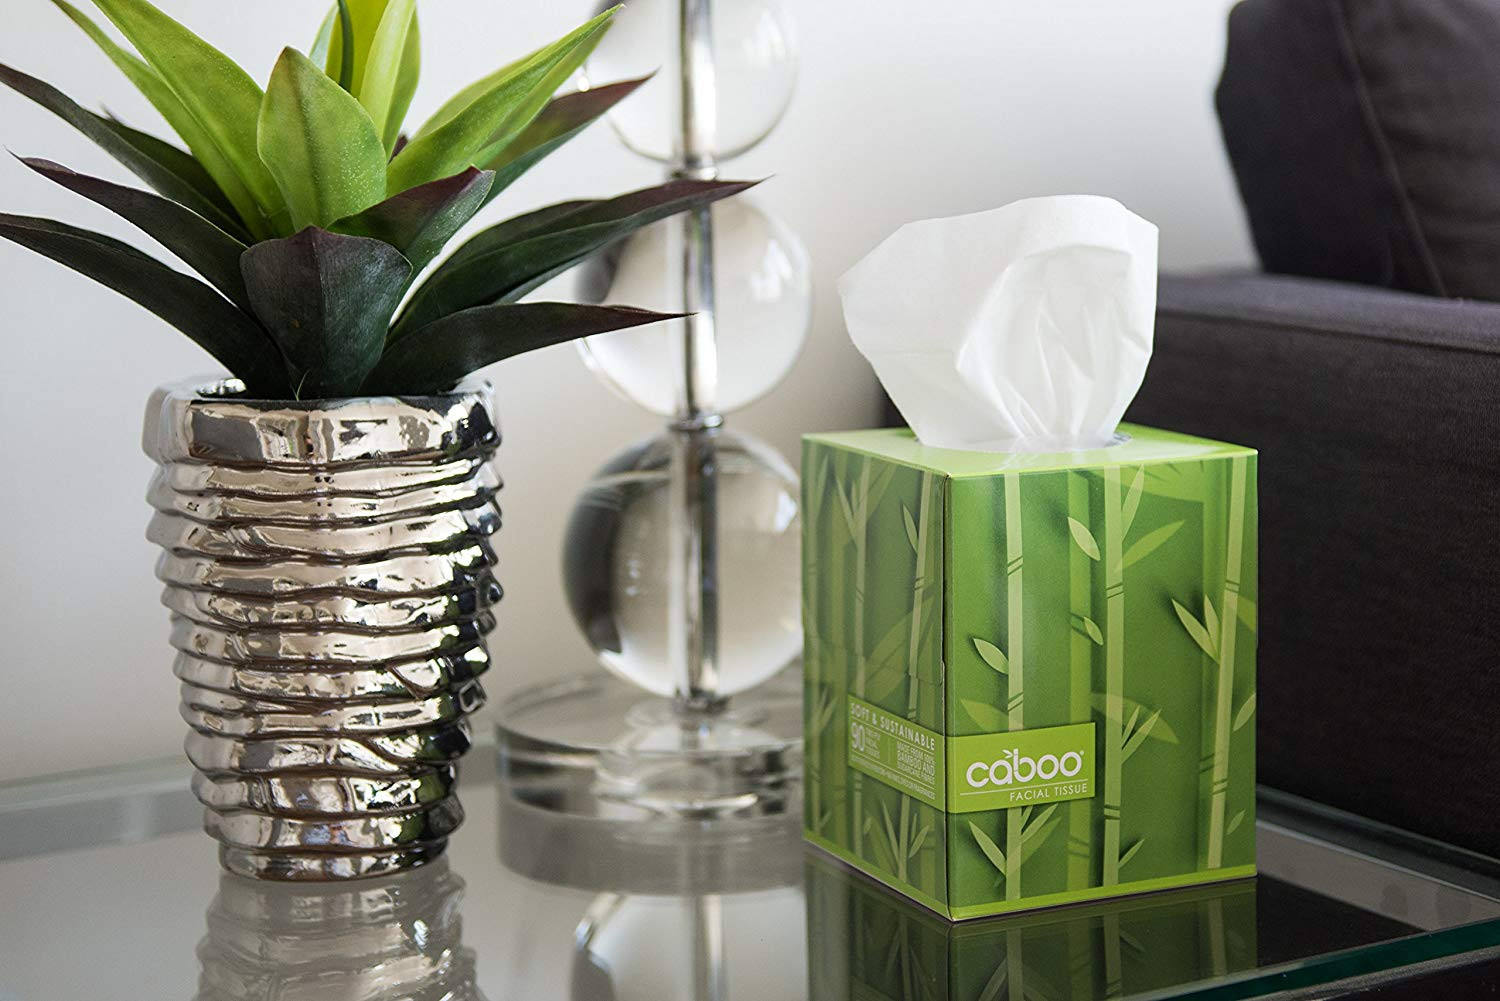 12 Awesome Global Views Green Vase 2024 free download global views green vase of amazon com caboo tree free bamboo facial tissue paper eco friendly within amazon com caboo tree free bamboo facial tissue paper eco friendly hypoallergenic tissue 